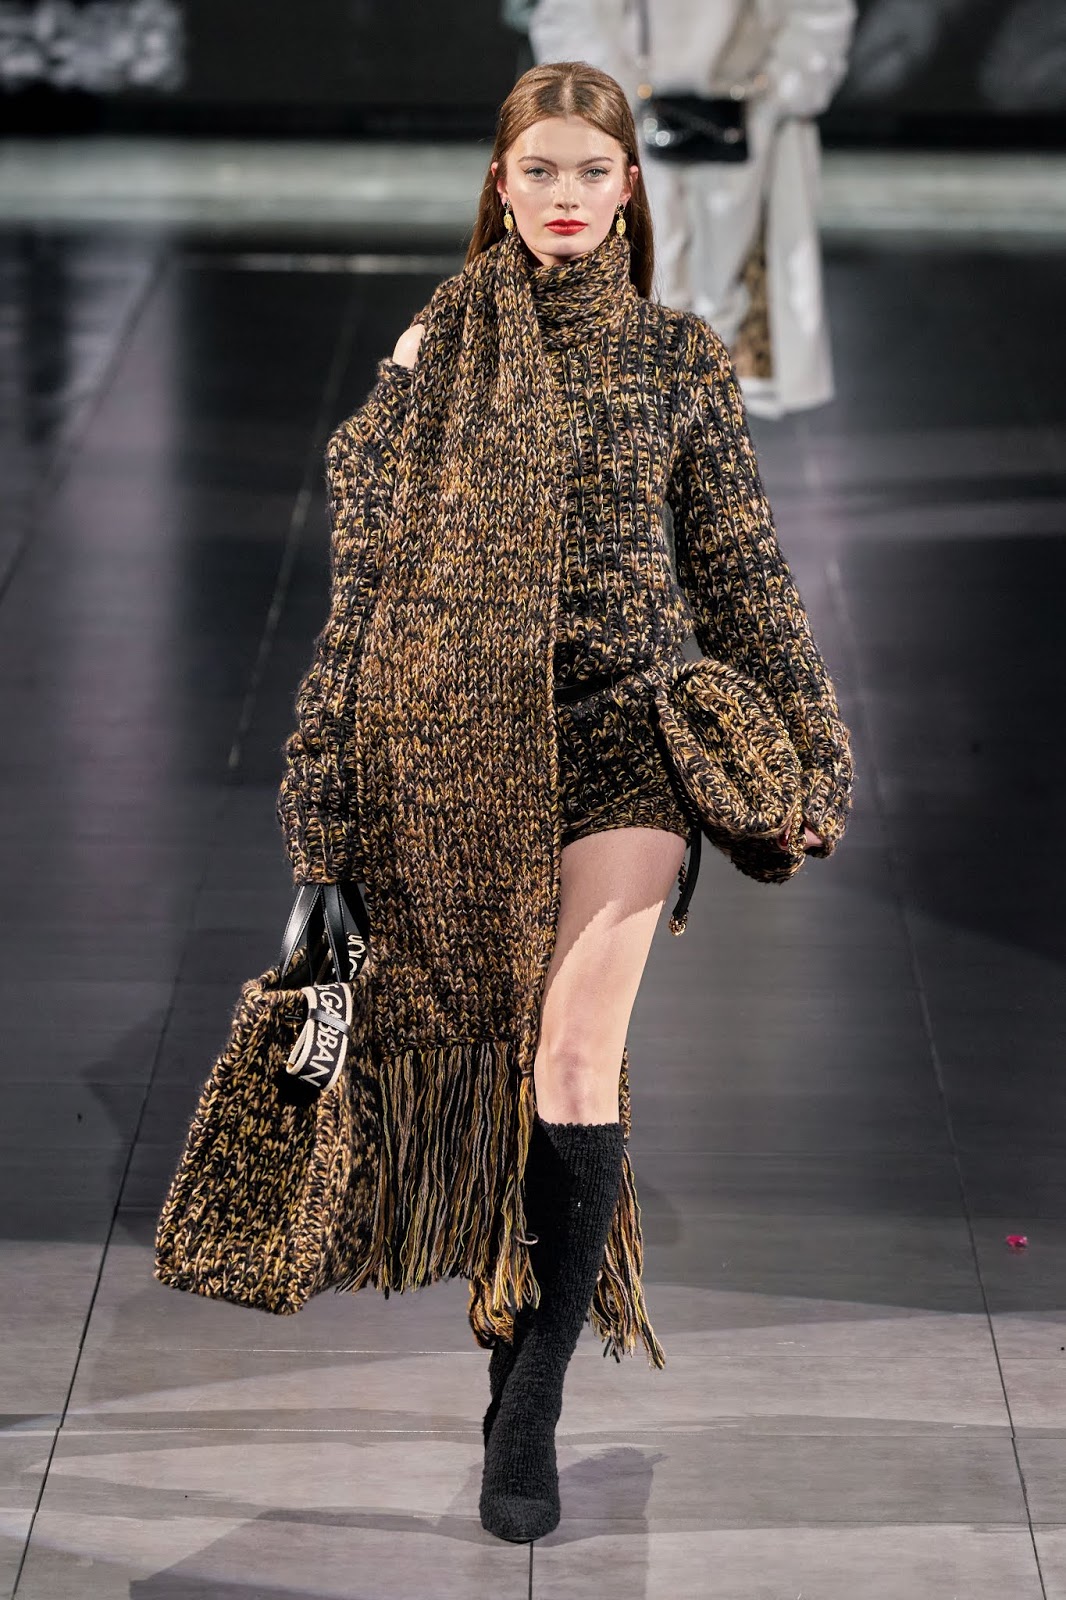 Pure Sweater GLAM: DOLCE AND GABBANA